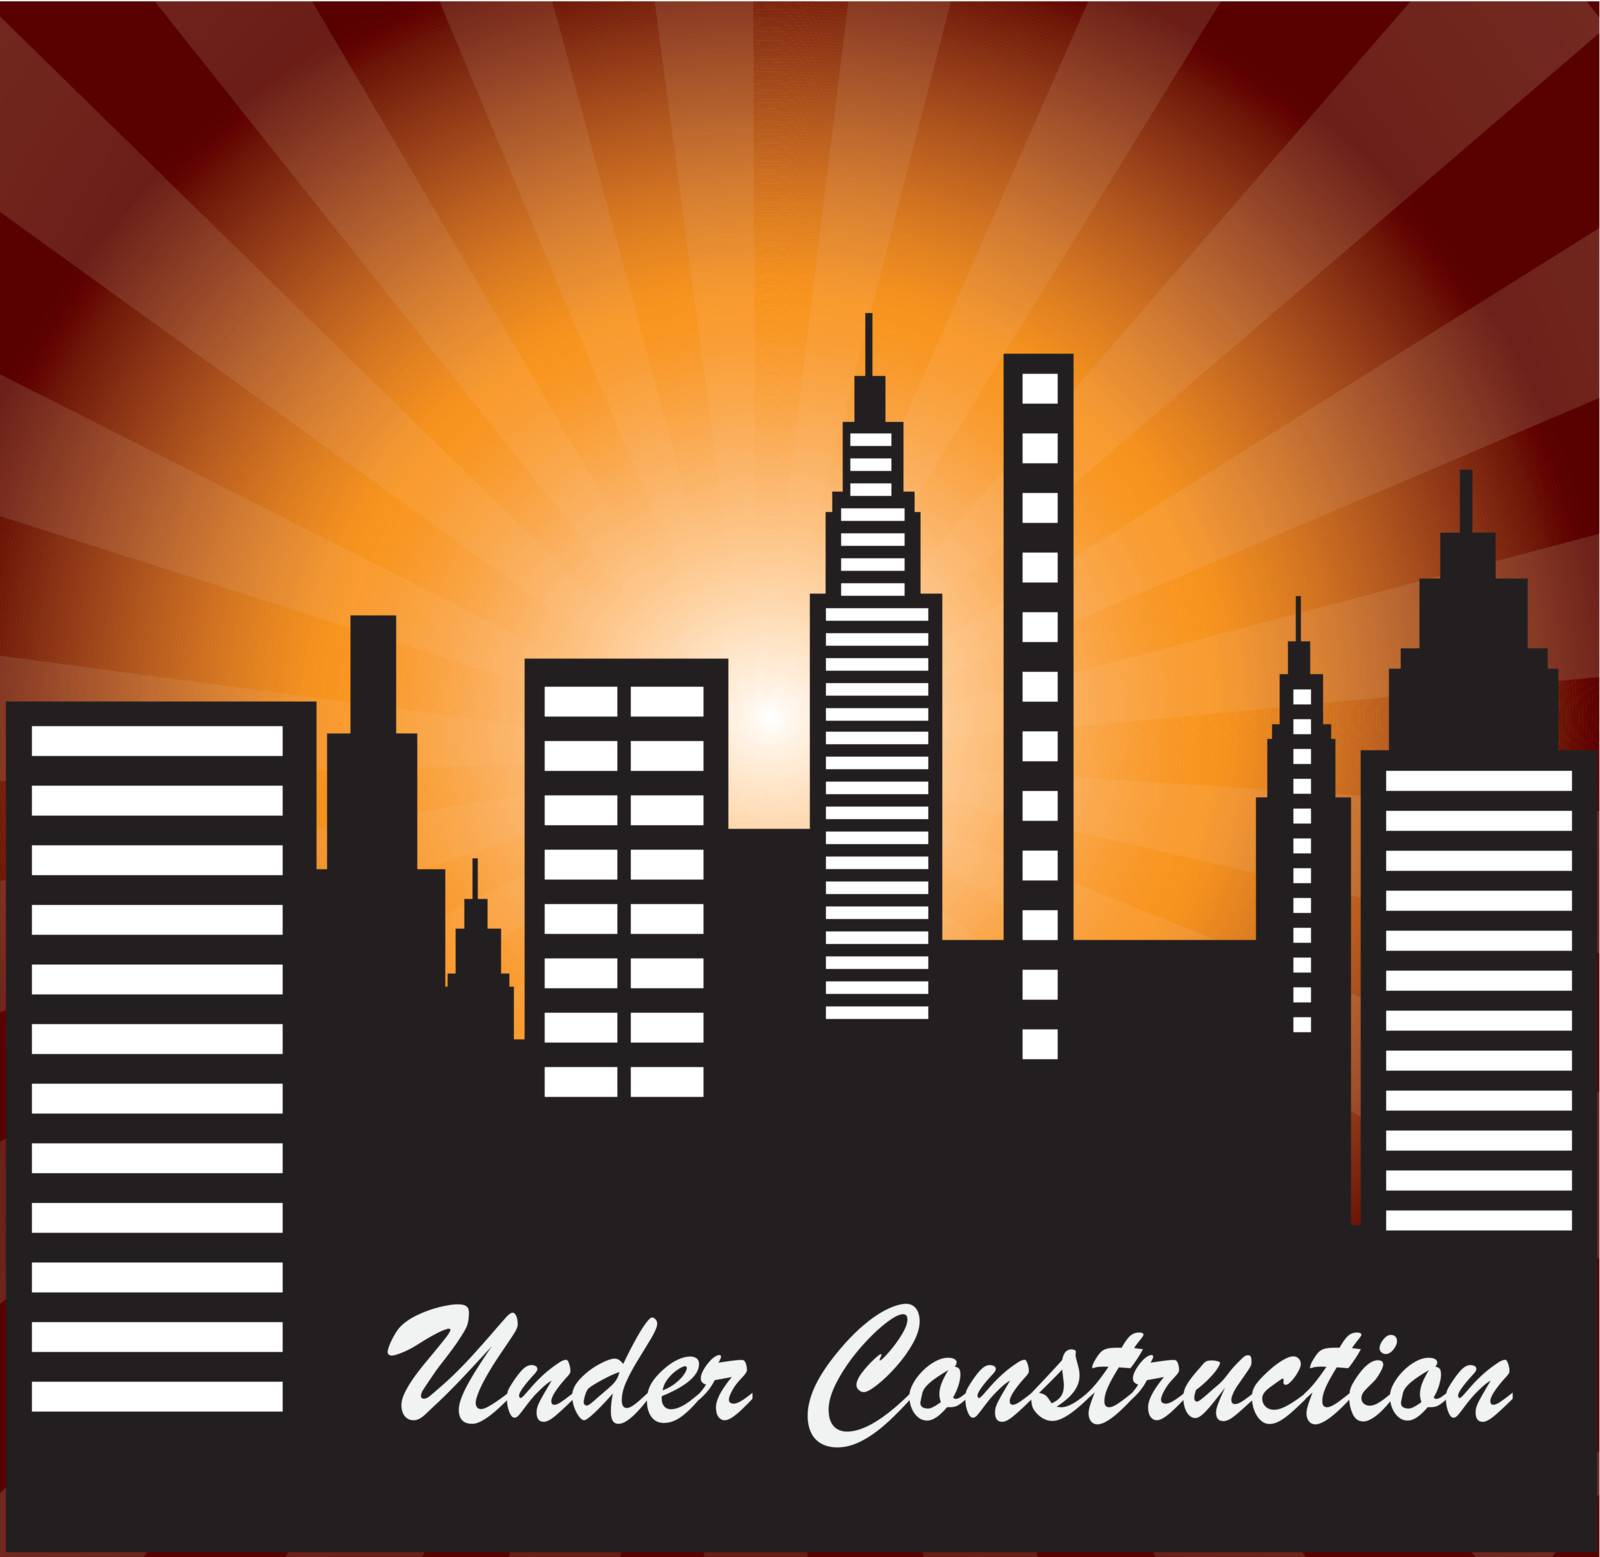 Under construction with building over light background 